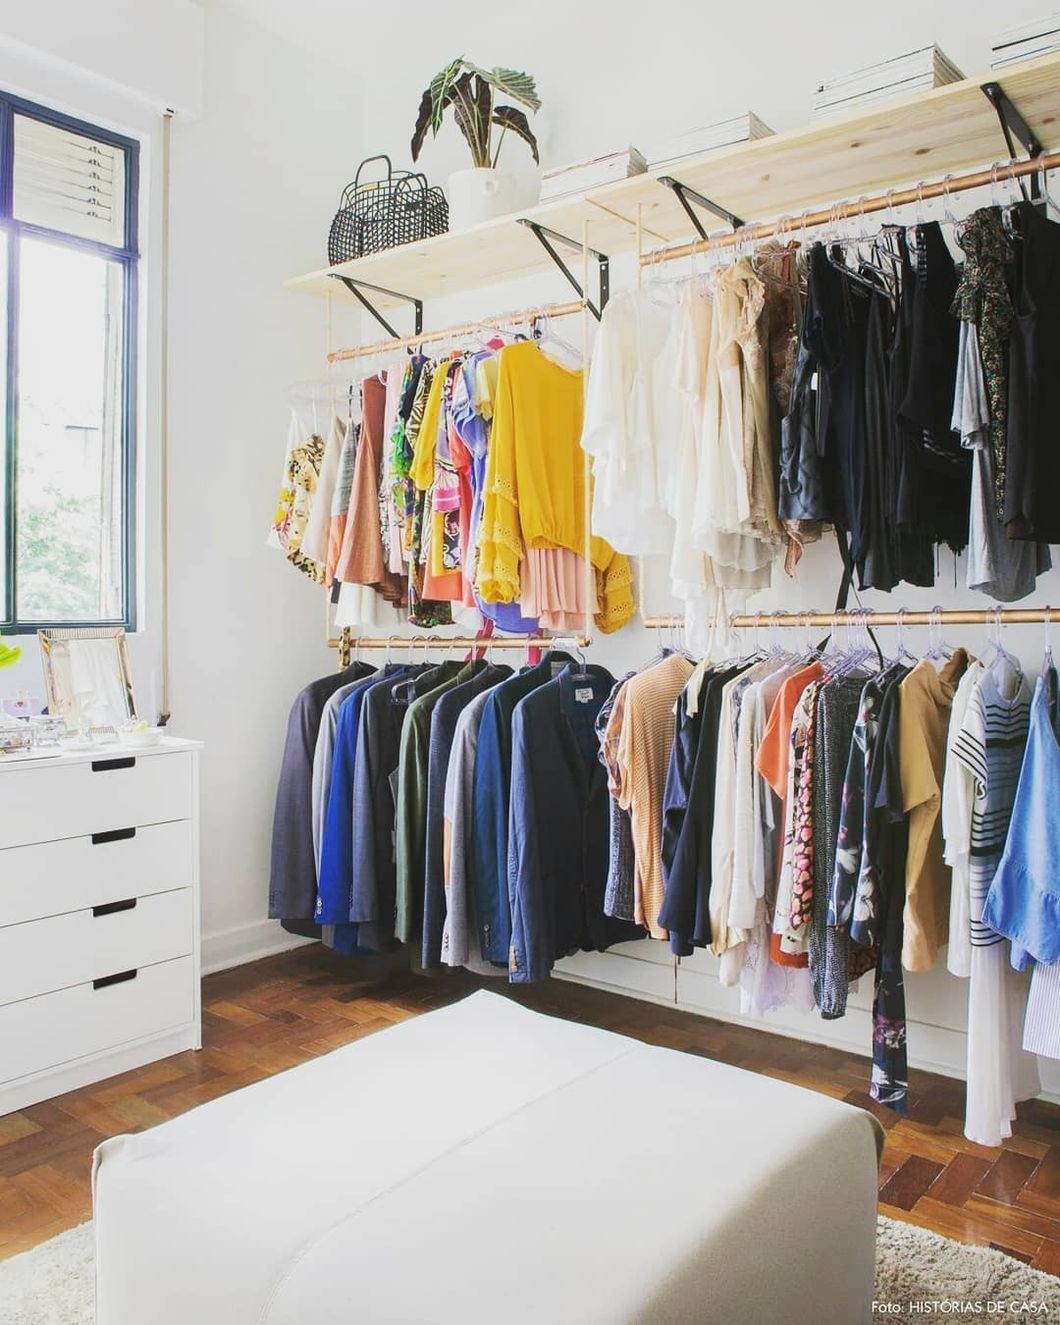 8 Reactions Every Student Has To Cleaning Out Their Closet